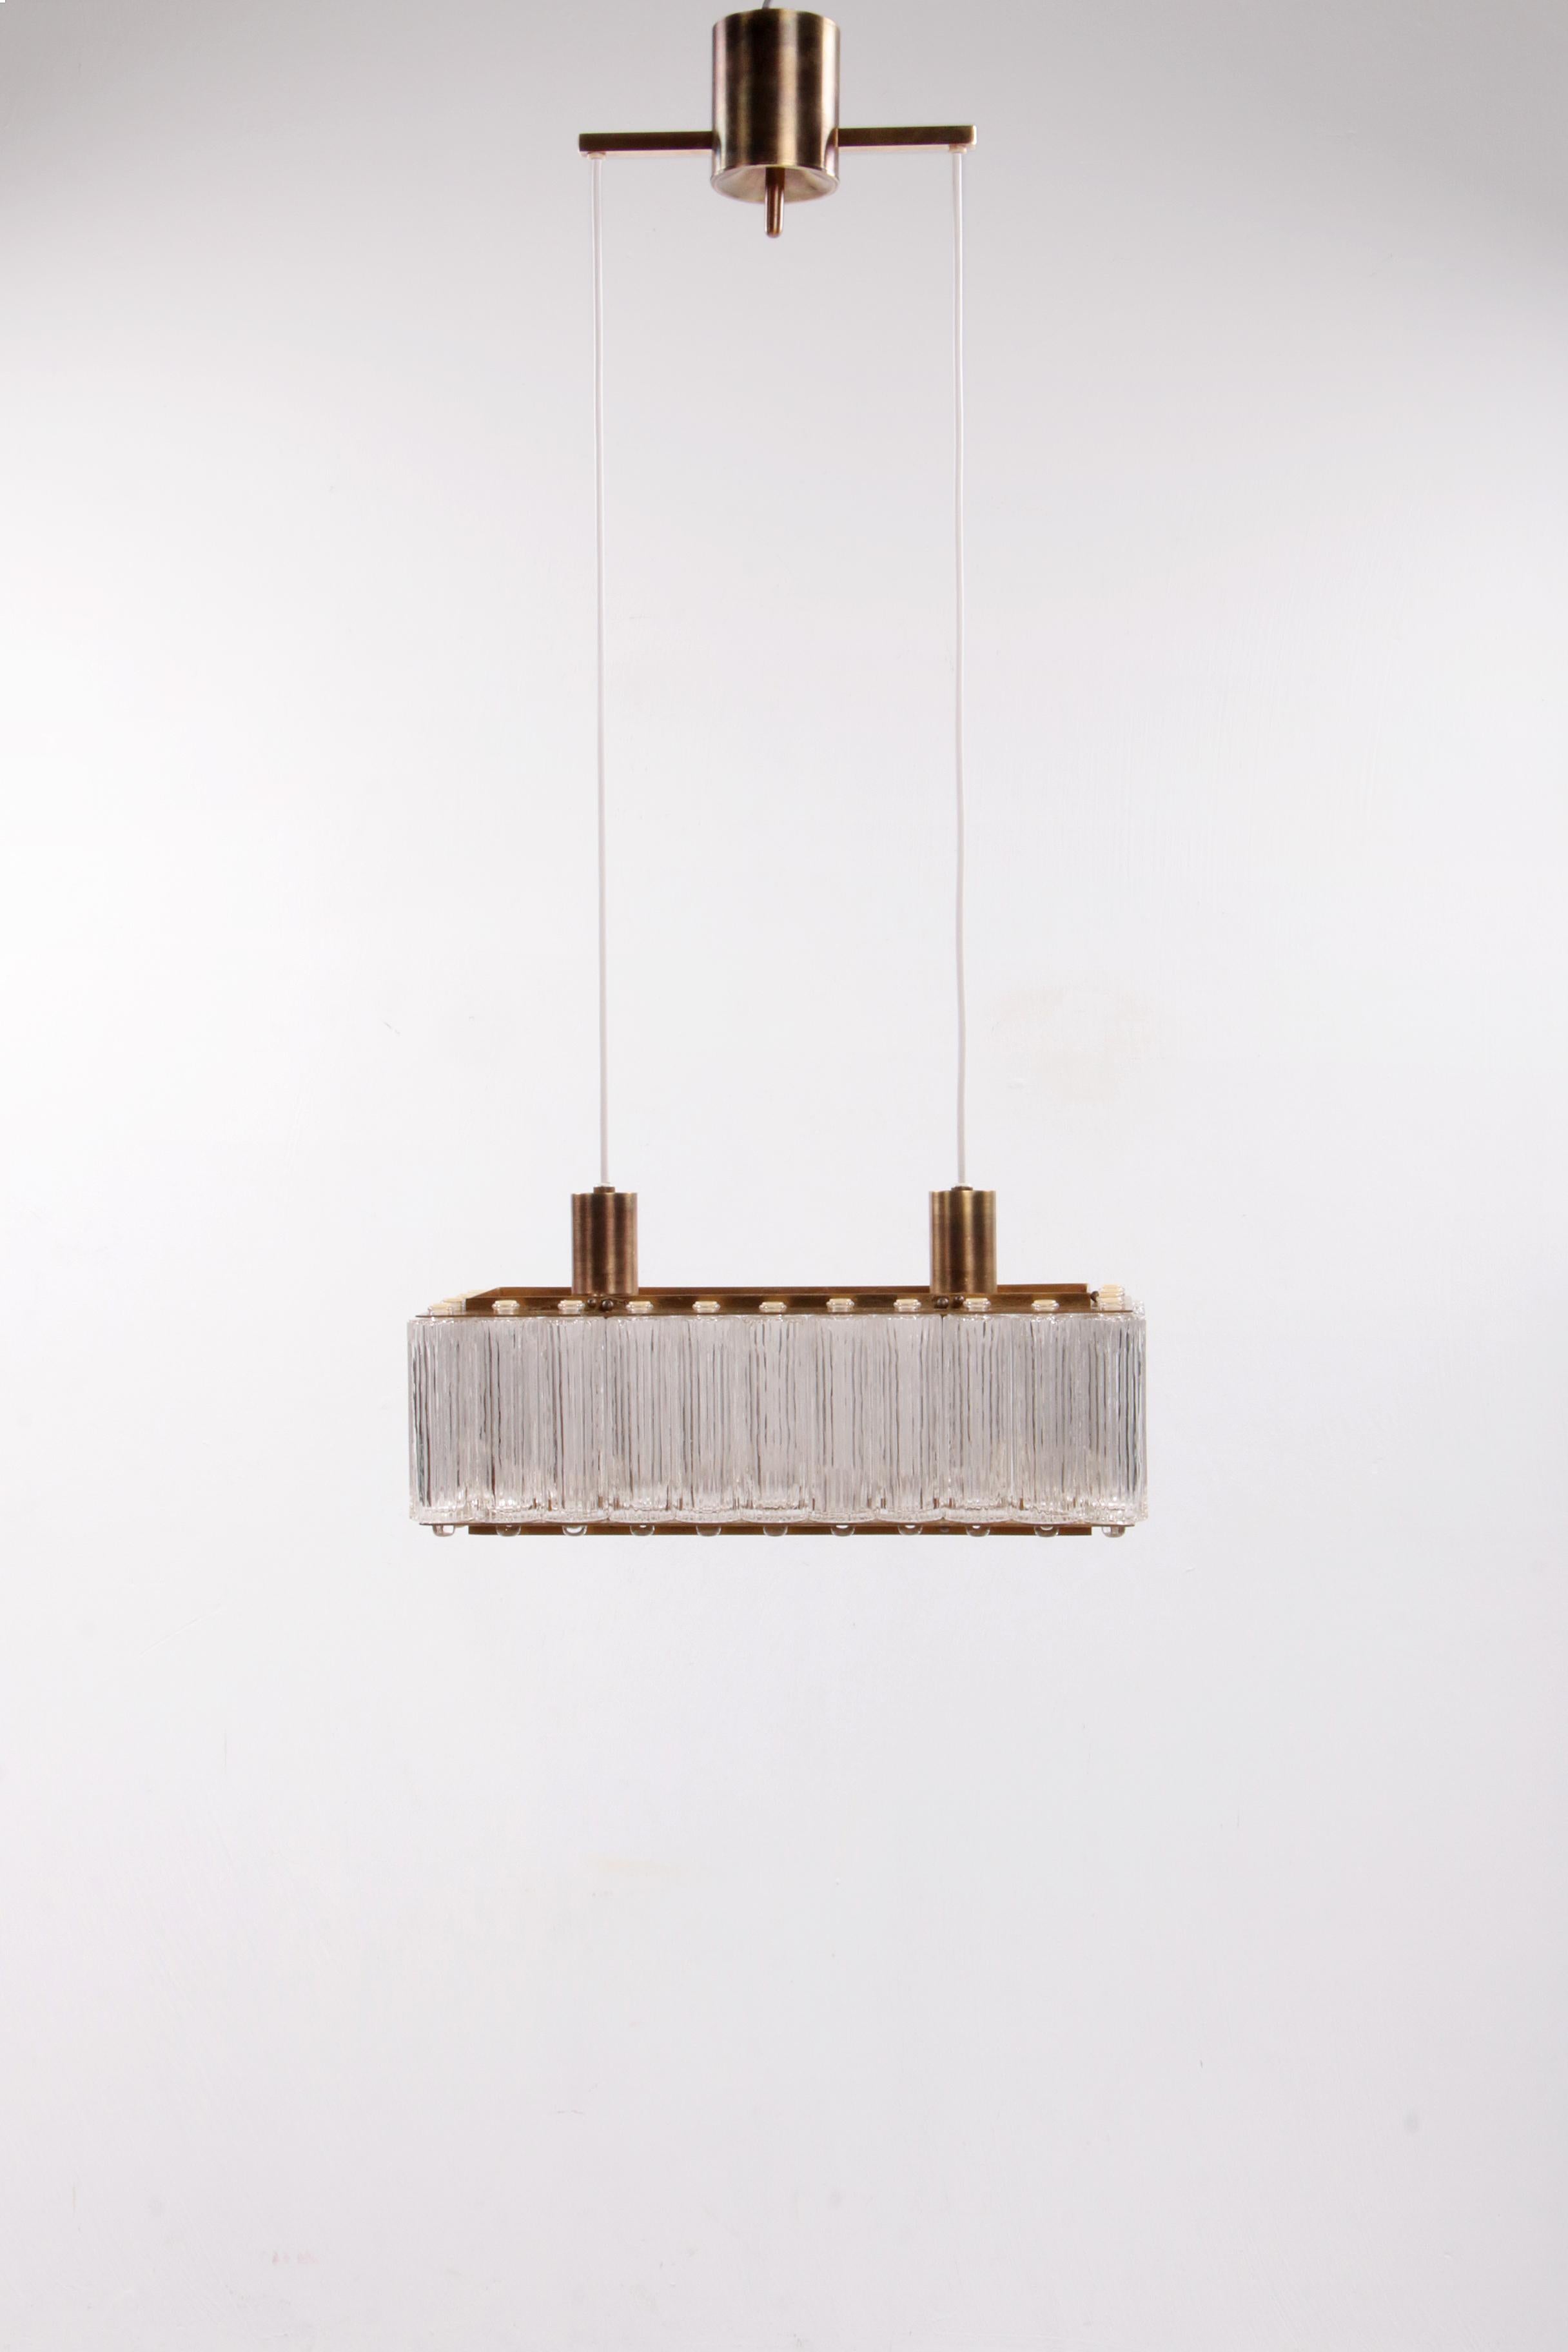 Rare rectangular pendant lamp Nordlys Light by Eric Warna.

This was a profile in a line called 